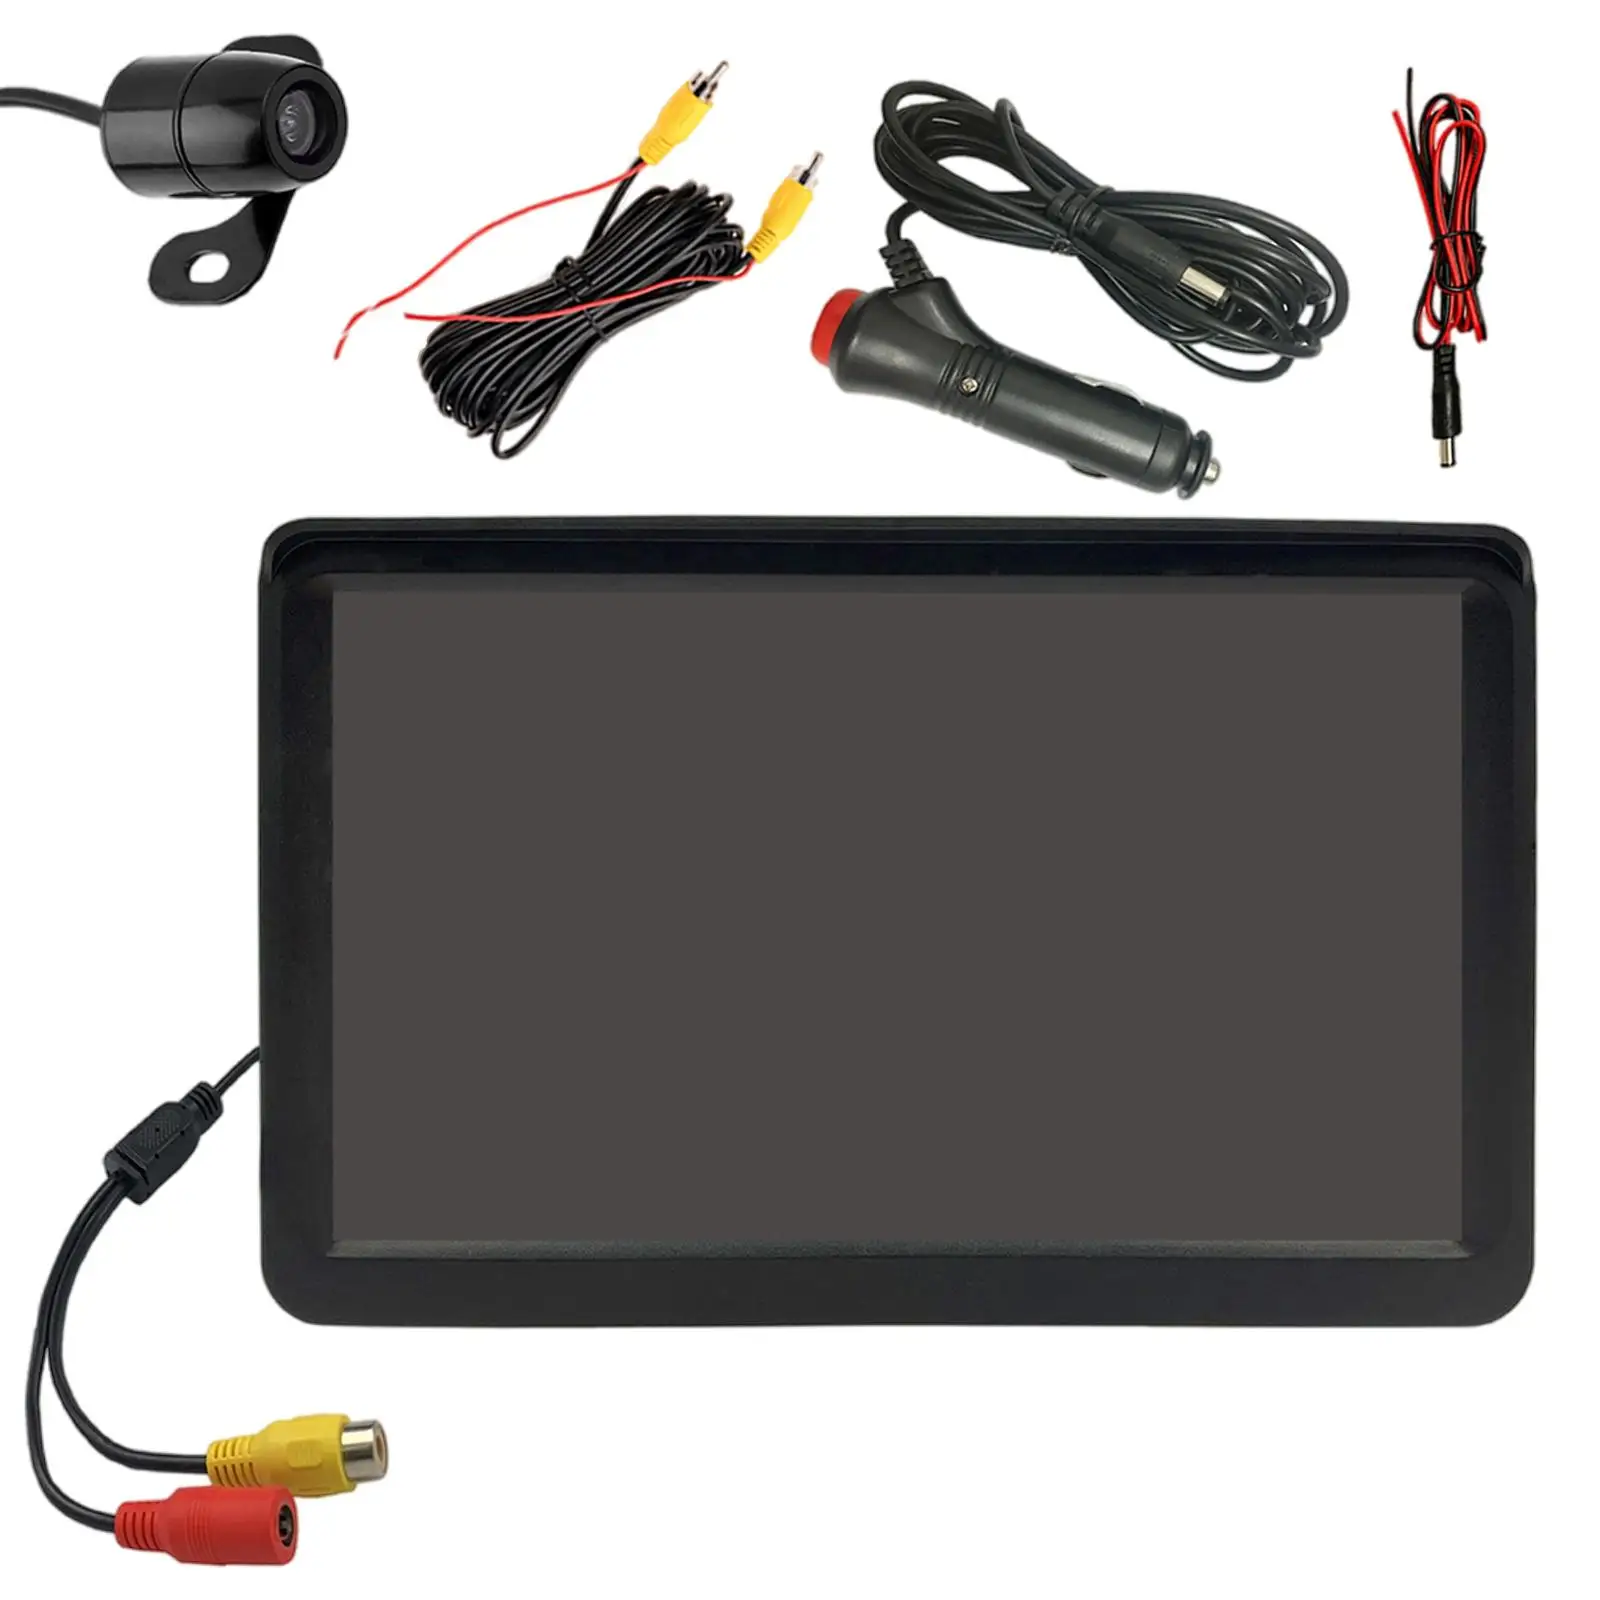 7 in Camera Kit Distance Lines Color Rear Monitor 170 Angle SUV